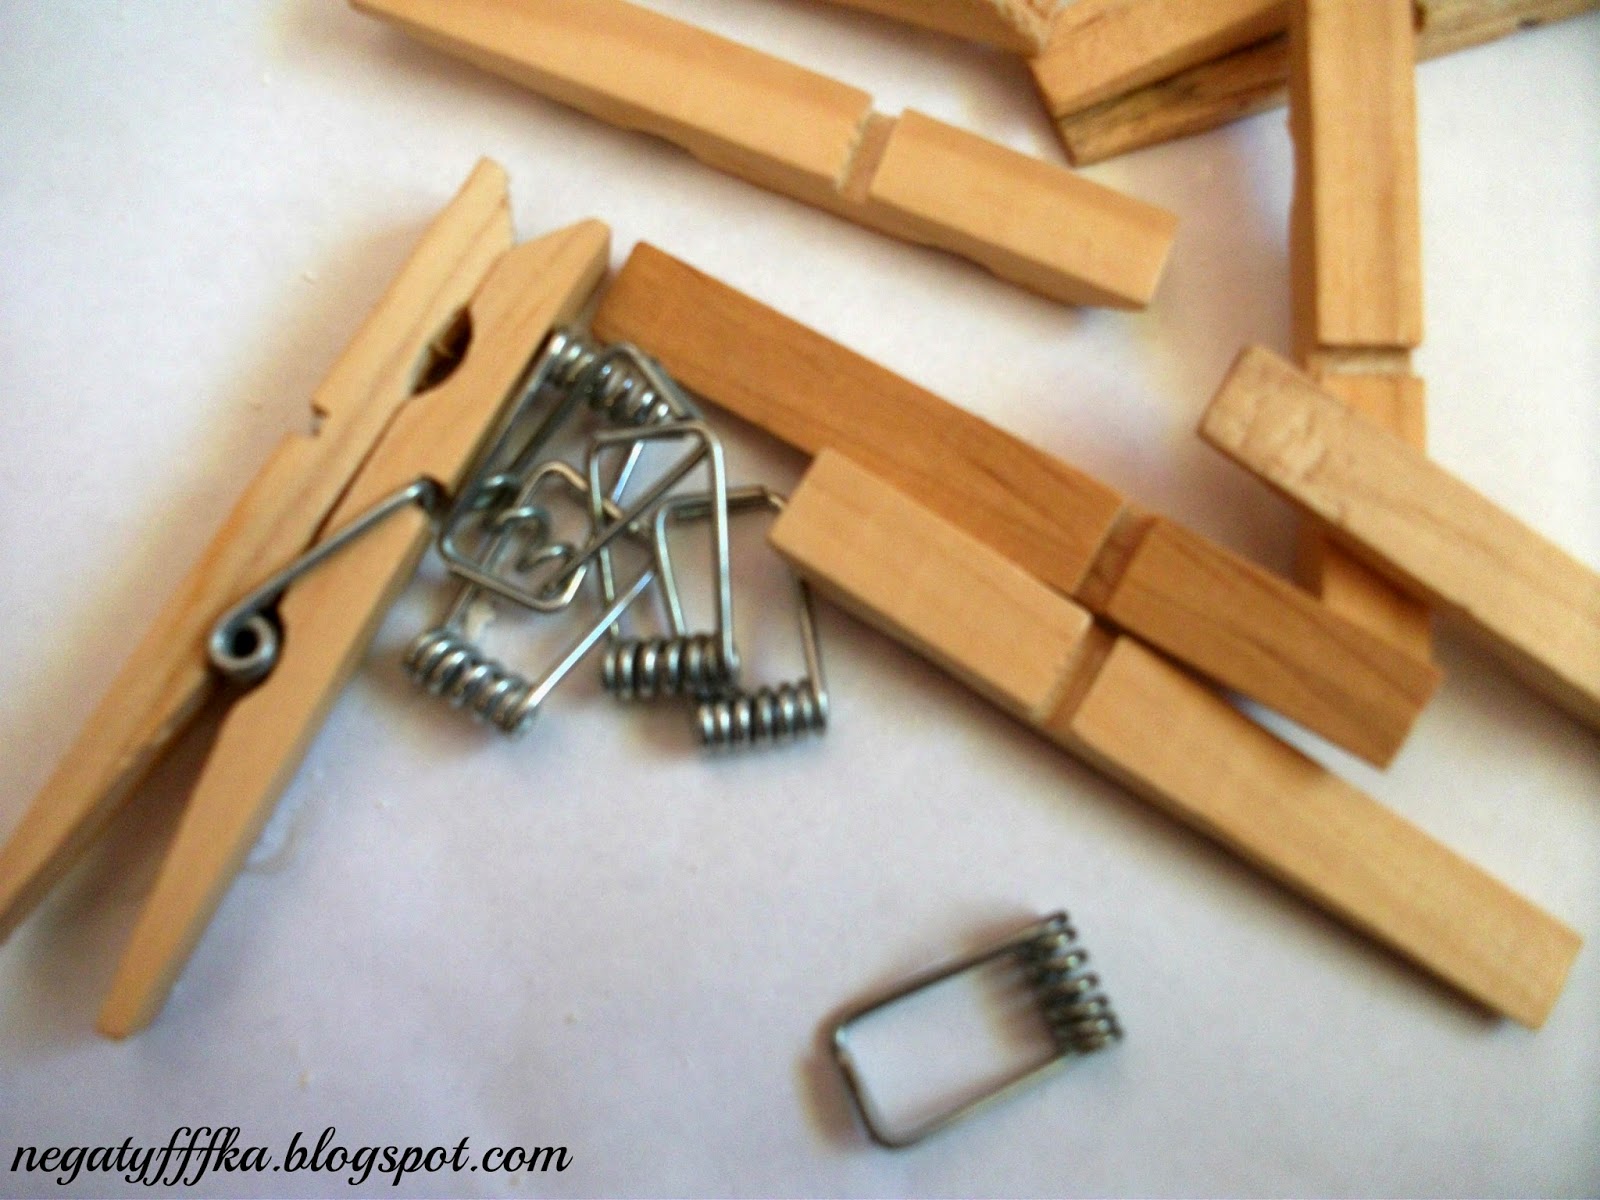 How-to-Make-a-Unique-Napkin-Holder-from-Clothespins-2.jpg